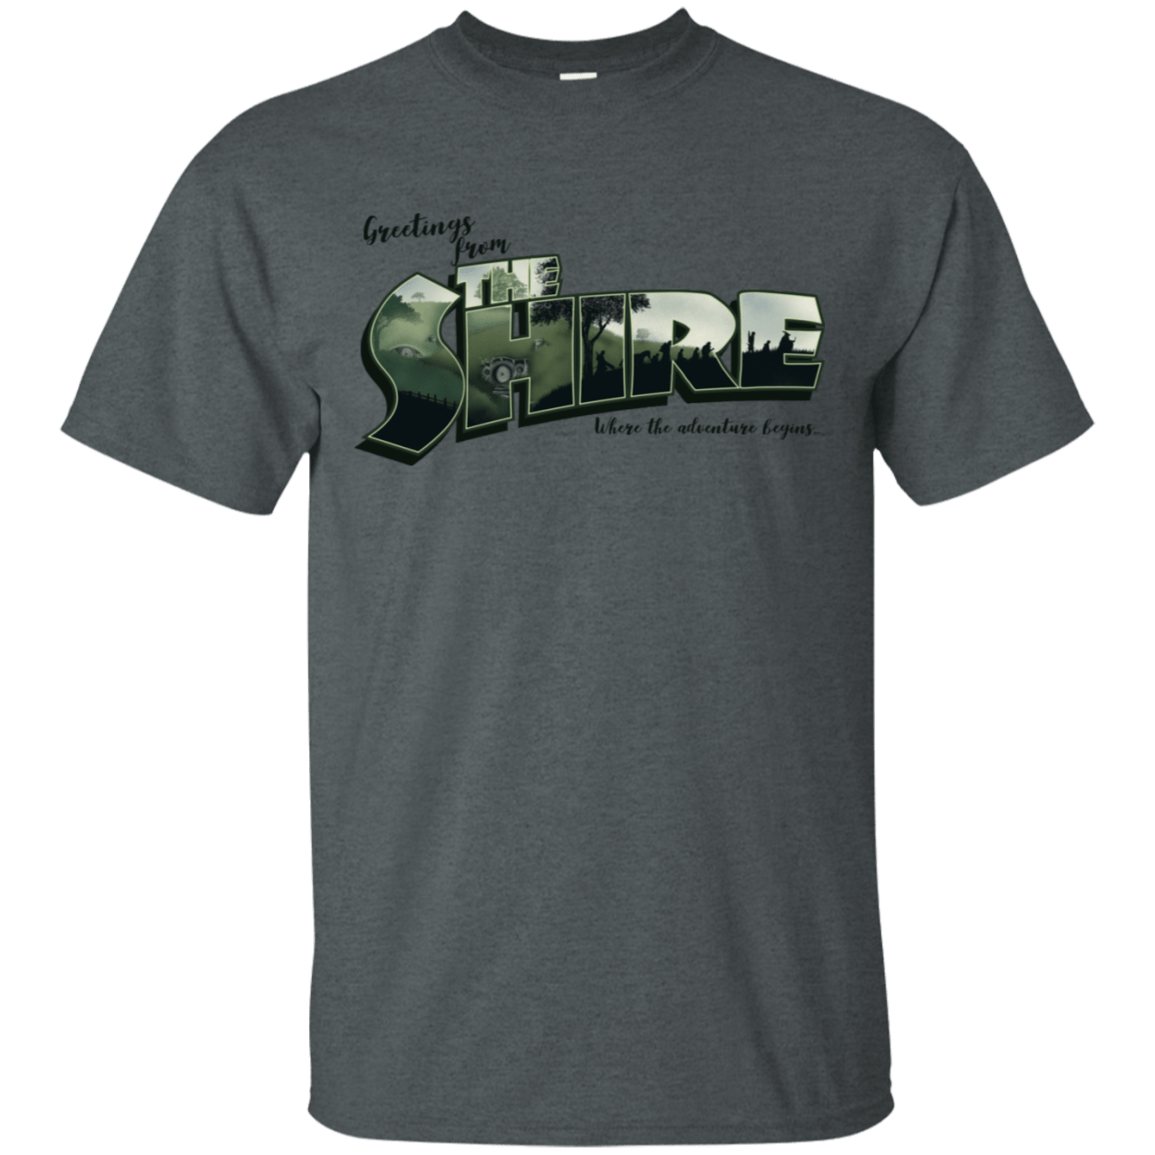 T-Shirts Dark Heather / S Greetings from the Shire T-Shirt